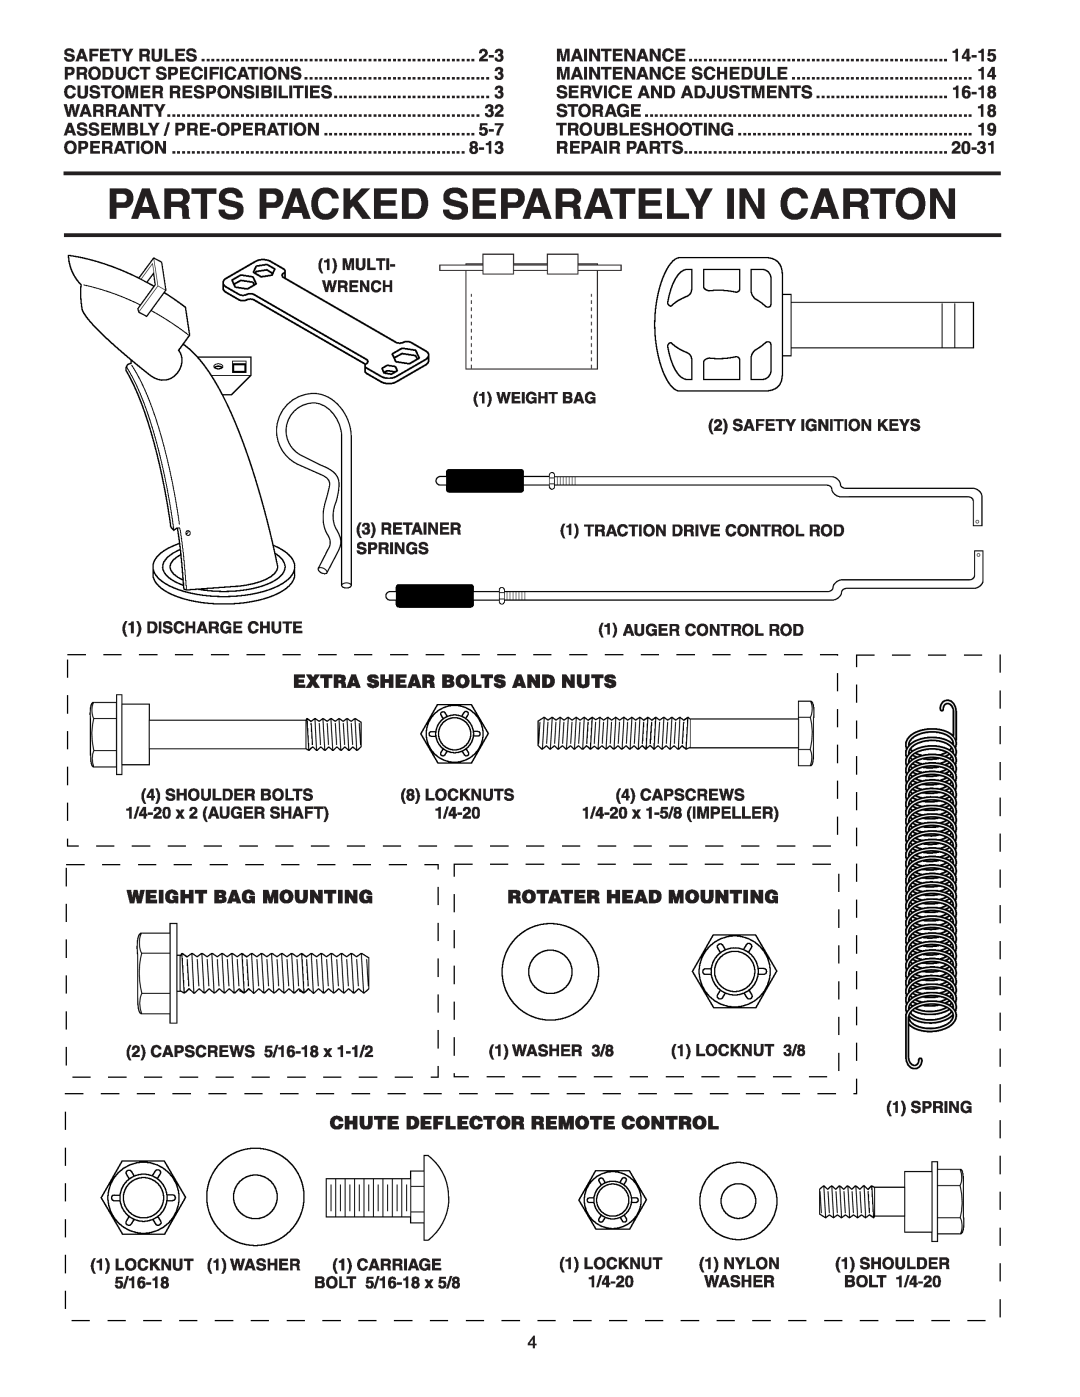 Poulan 183616 Parts Packed Separately In Carton, 8-13, 14-15, Service And Adjustments, 16-18, 20-31, Safety Rules, Storage 